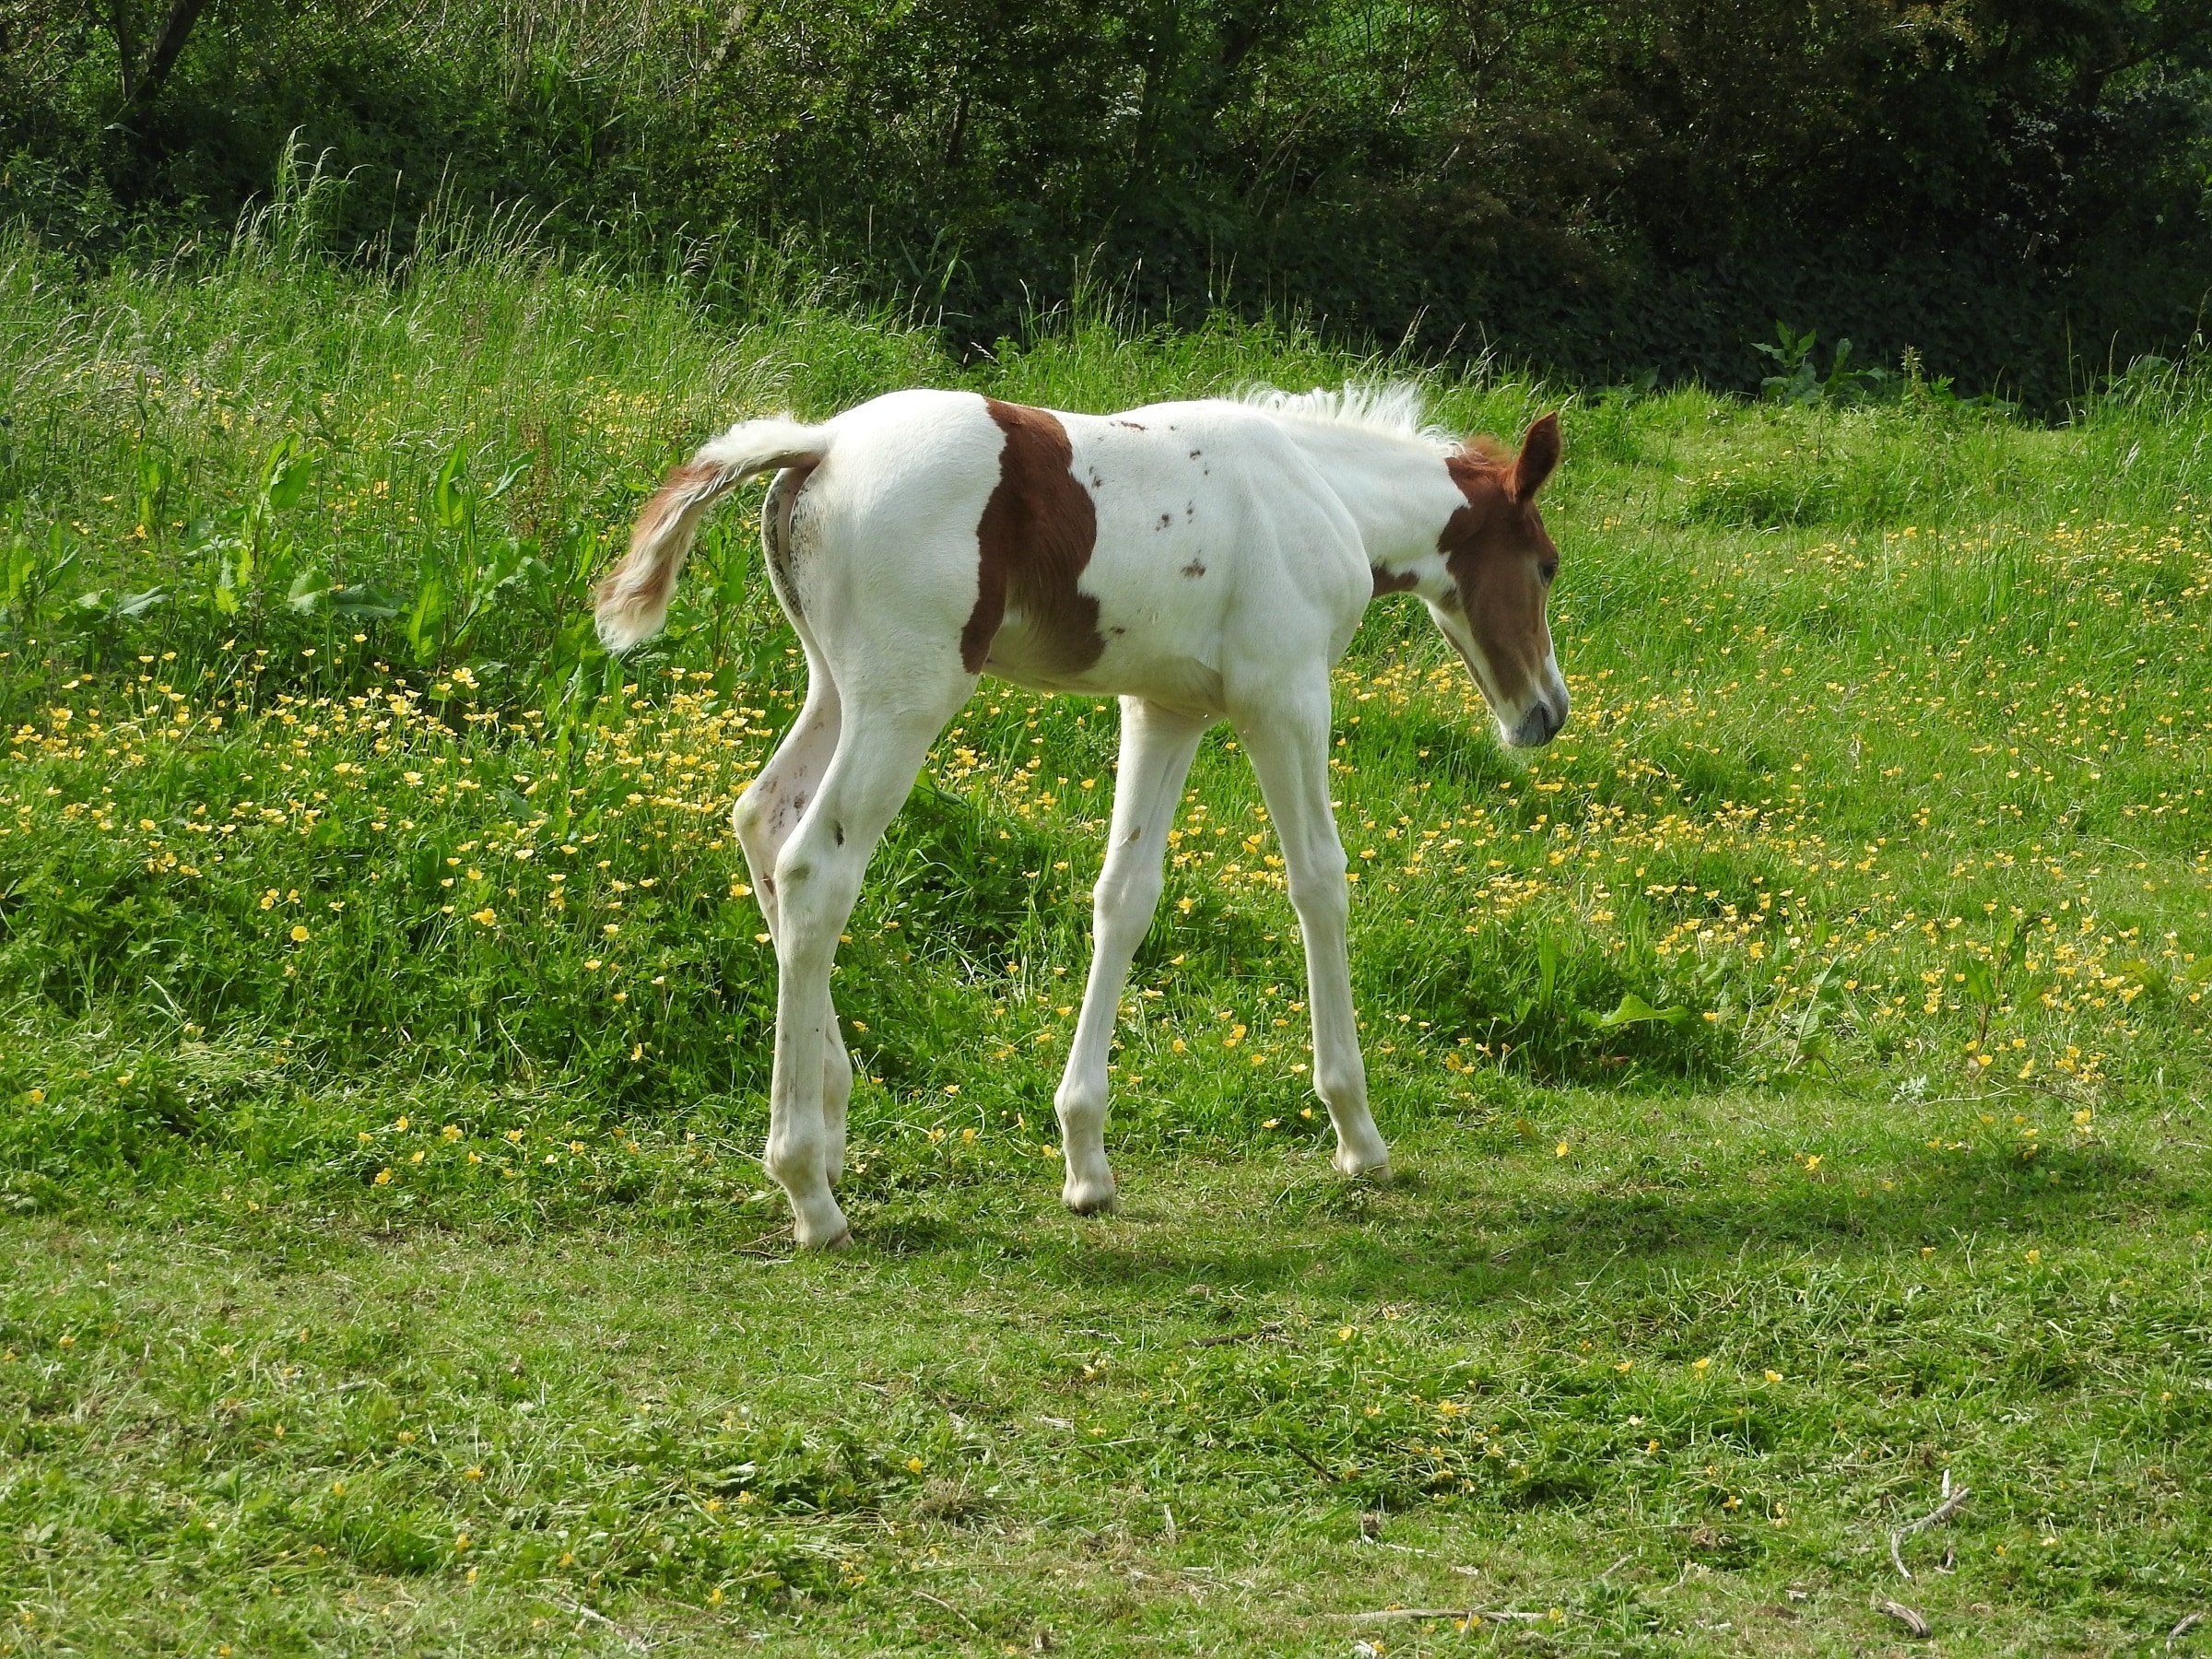 brown and white horse on green grass photograph during day time